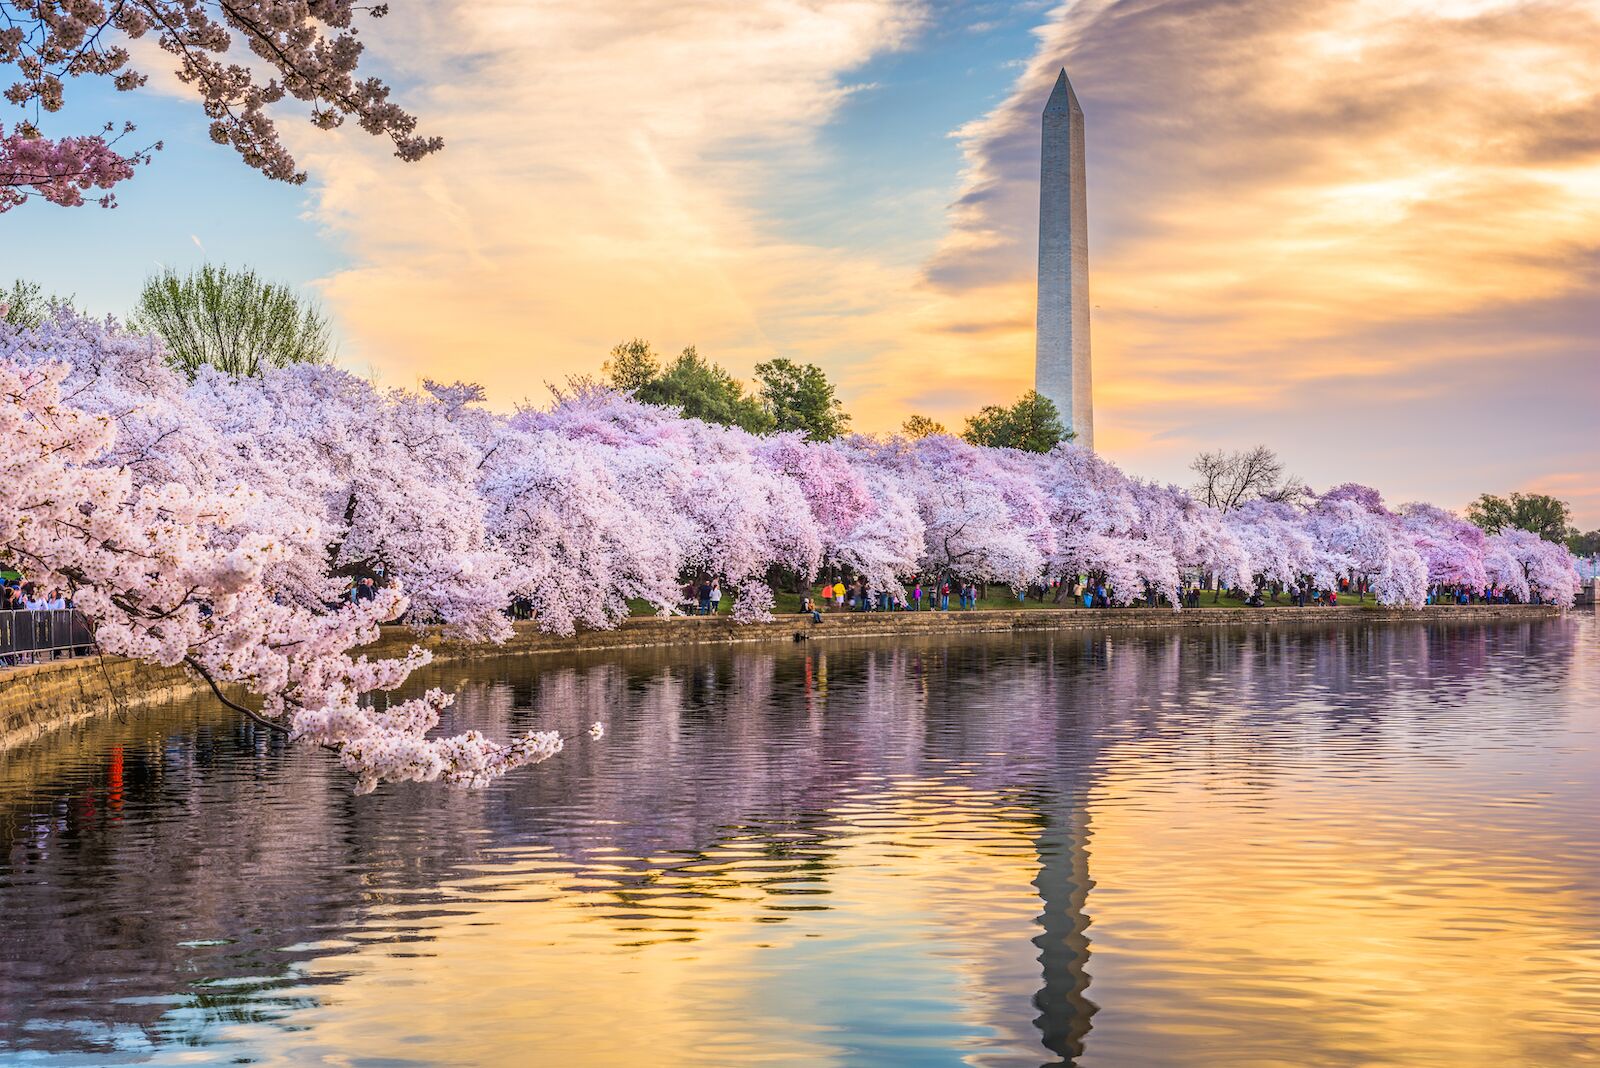 Cherry blossoms surrounding the Tidal Basin in the National Mall in Washington, DC